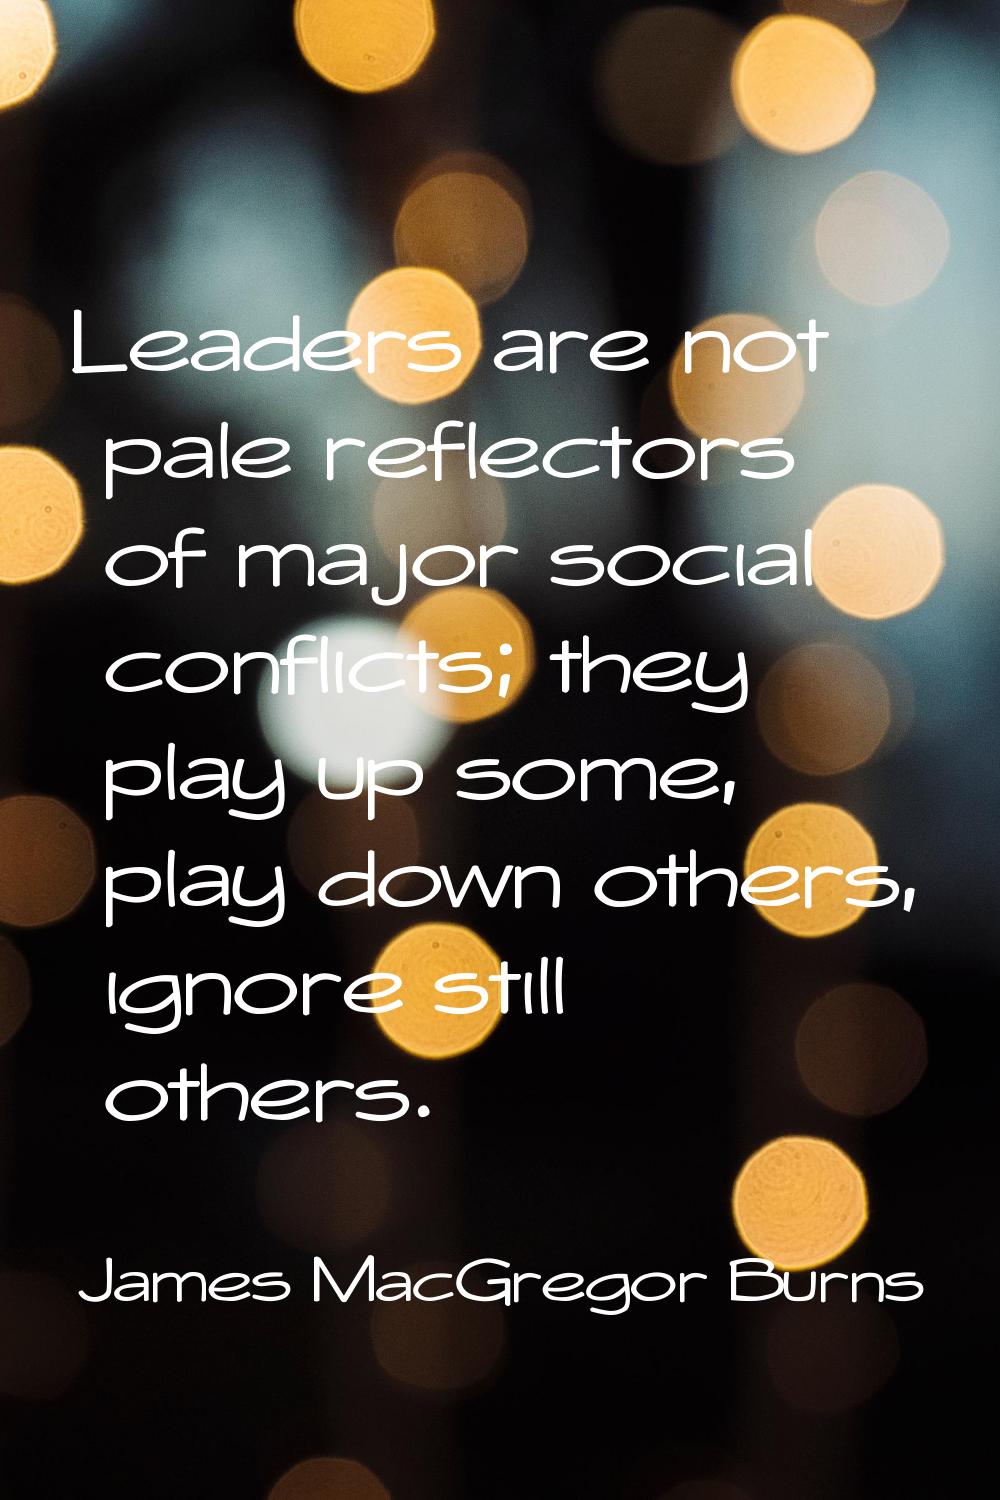 Leaders are not pale reflectors of major social conflicts; they play up some, play down others, ign